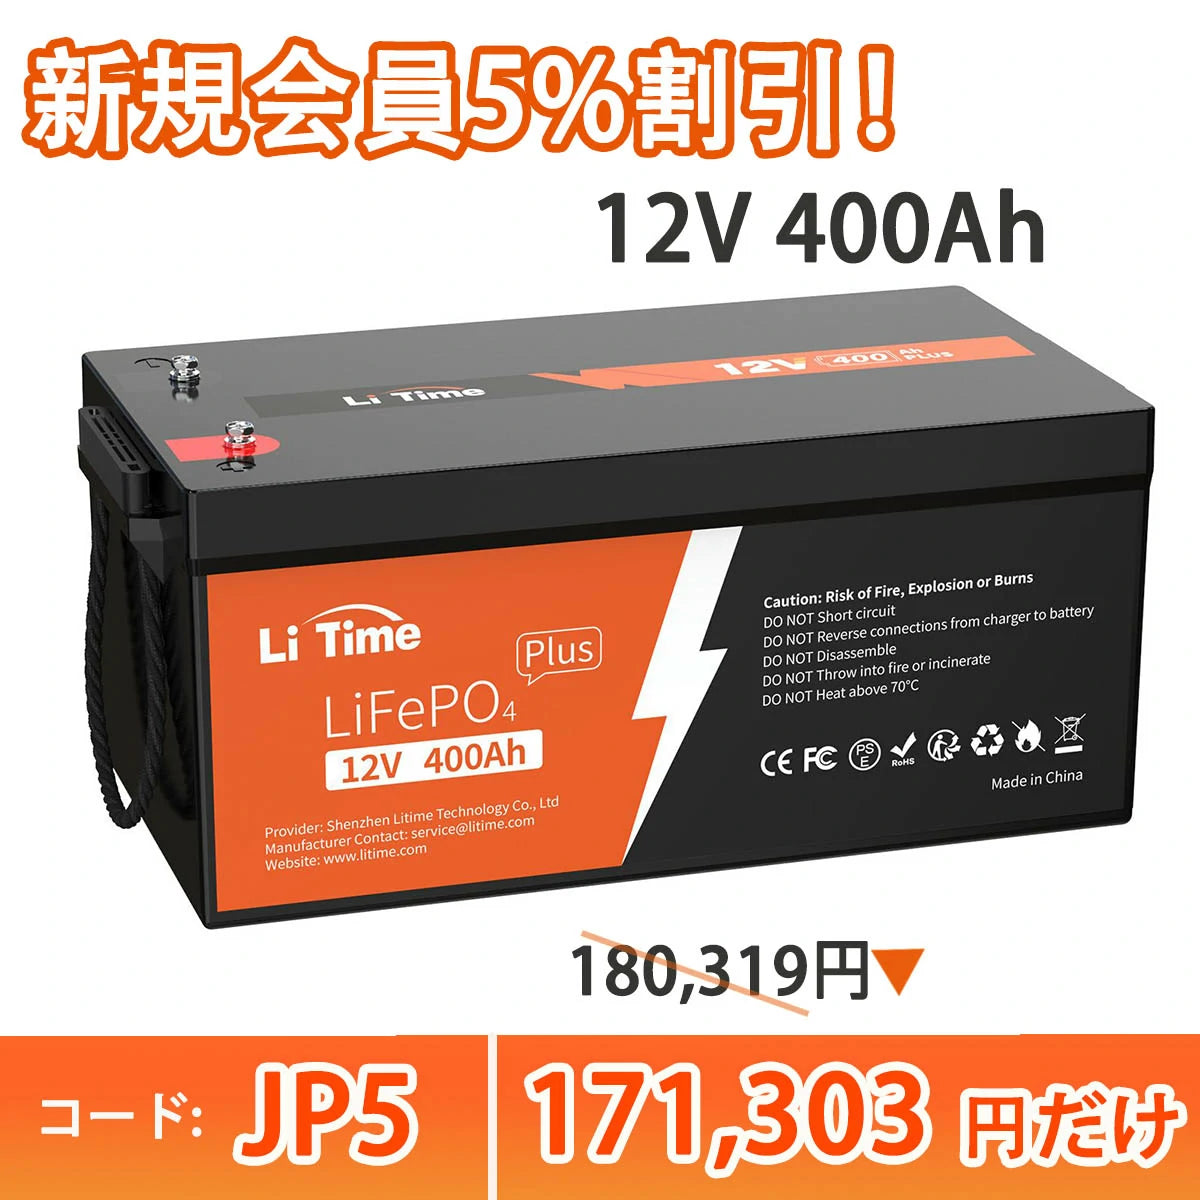 LiTime「Ampere Time 」12V 400Ah LiFePO4 リン酸鉄リチウムイオンバッテリー 内蔵250A BMS https://jp.litime.com/products/litime12v400ah